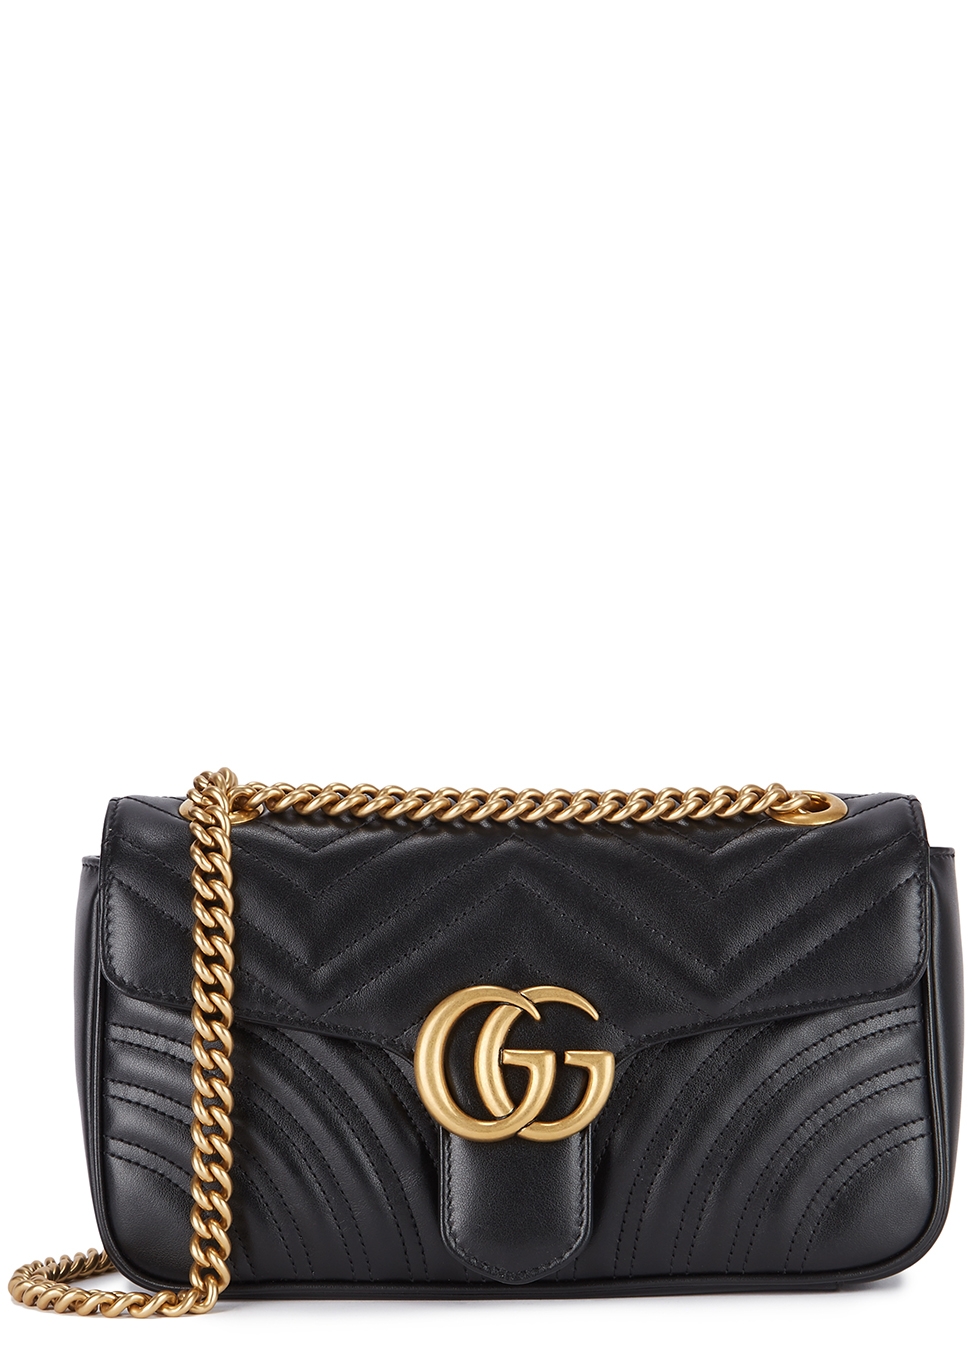 gucci small leather shoulder bag